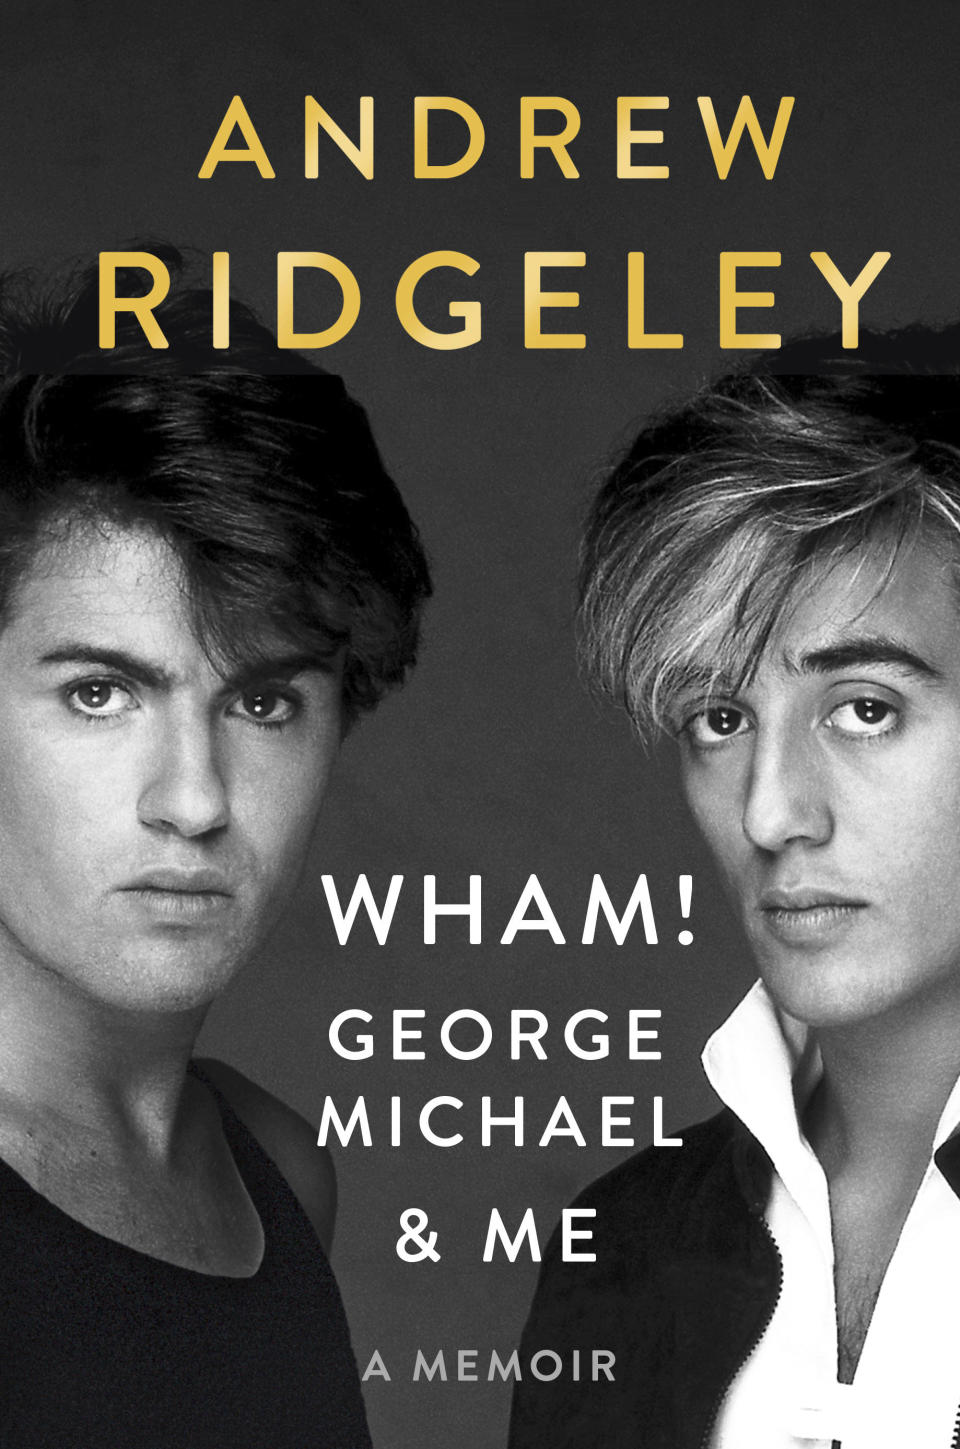 FIXES TYPO IN BOOK TITLE - This cover image released by Dutton shows "Wham! George Michael & Me," a memoir by Andrew Ridgeley. In the book, Ridgeley traces the rise of Wham! and key moments in the band’s career, like the creation of hits like “Careless Whisper” and “Everything She Wants,” their appearances at Live Aid and the time in 1985 when the band became the first Western pop group to visit China. (Dutton via AP)